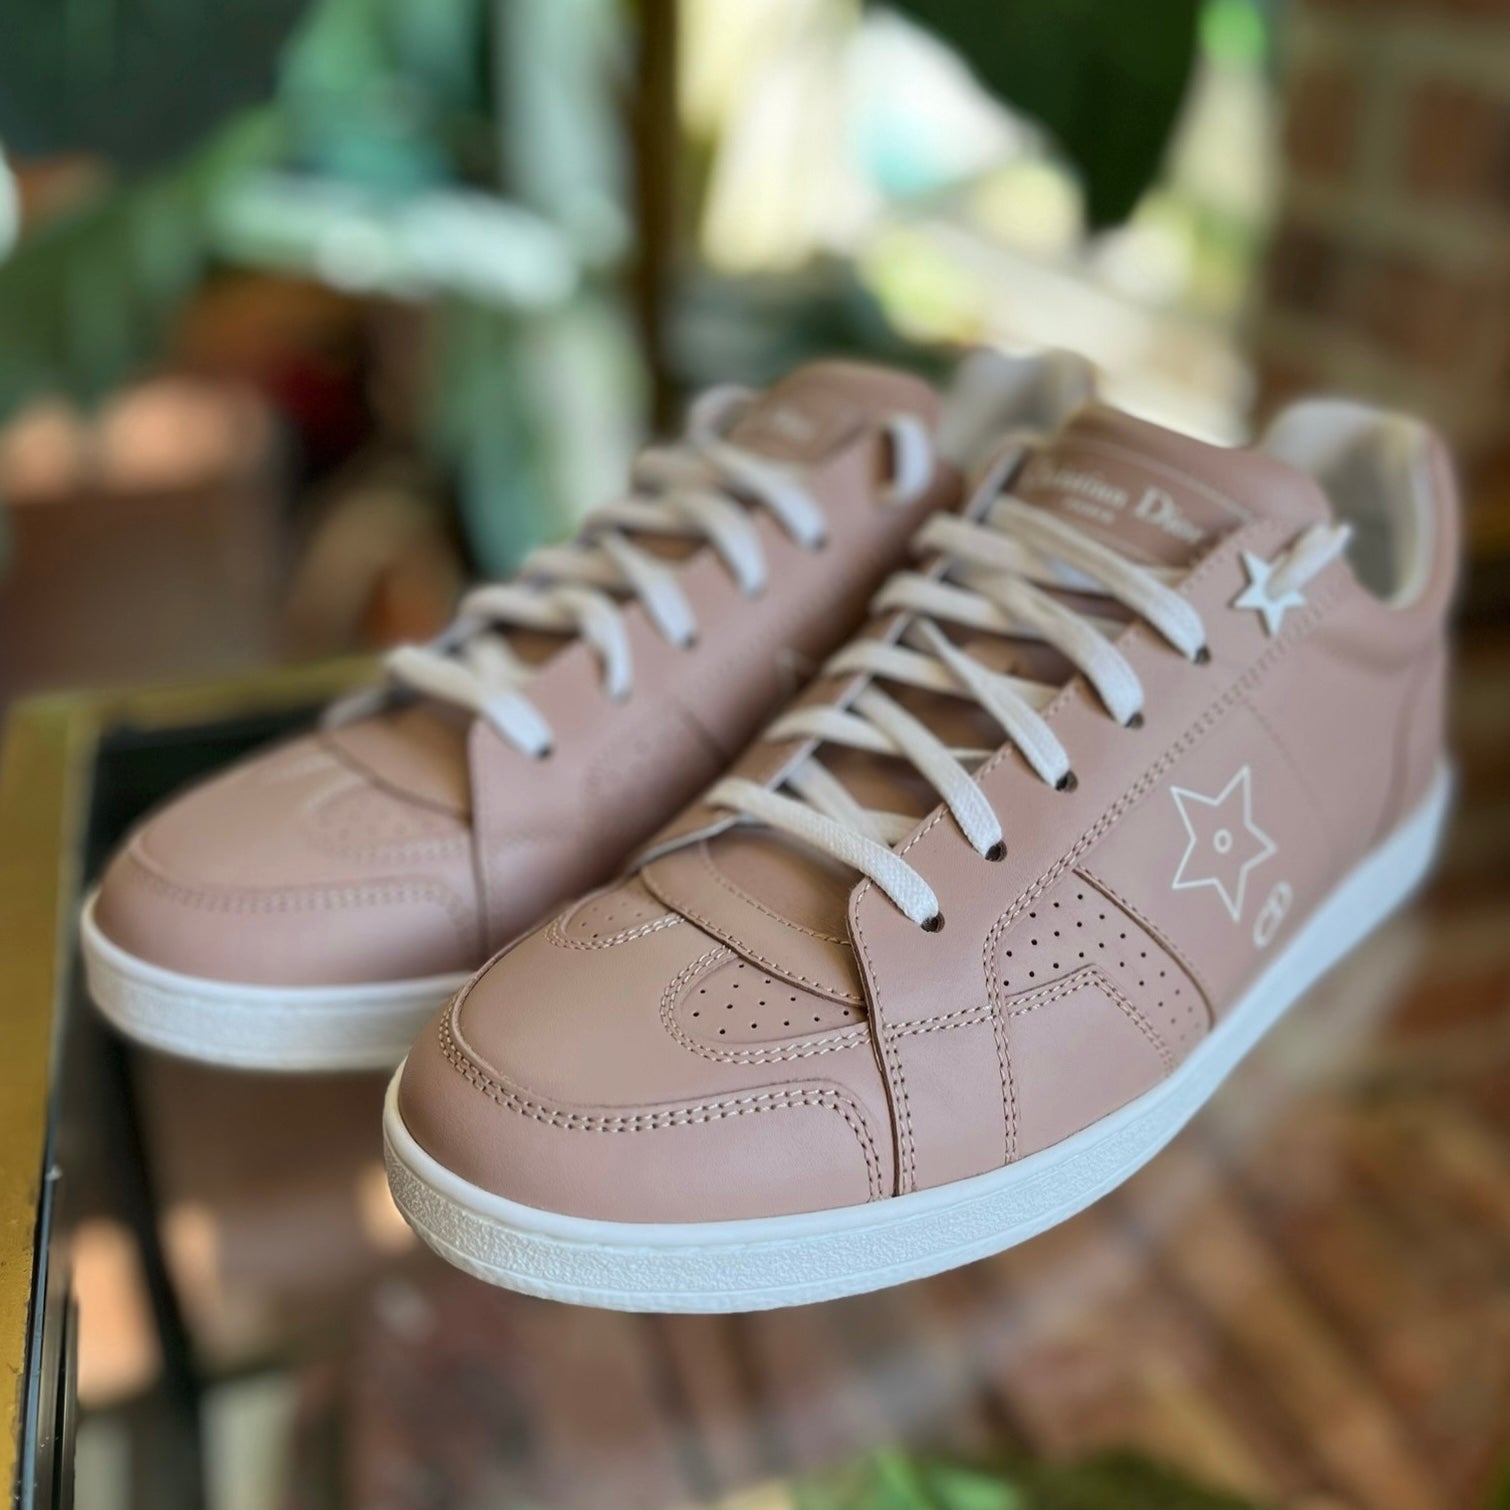 CHRISTIAN DIOR Men's Nude Star Trainers Sz 39